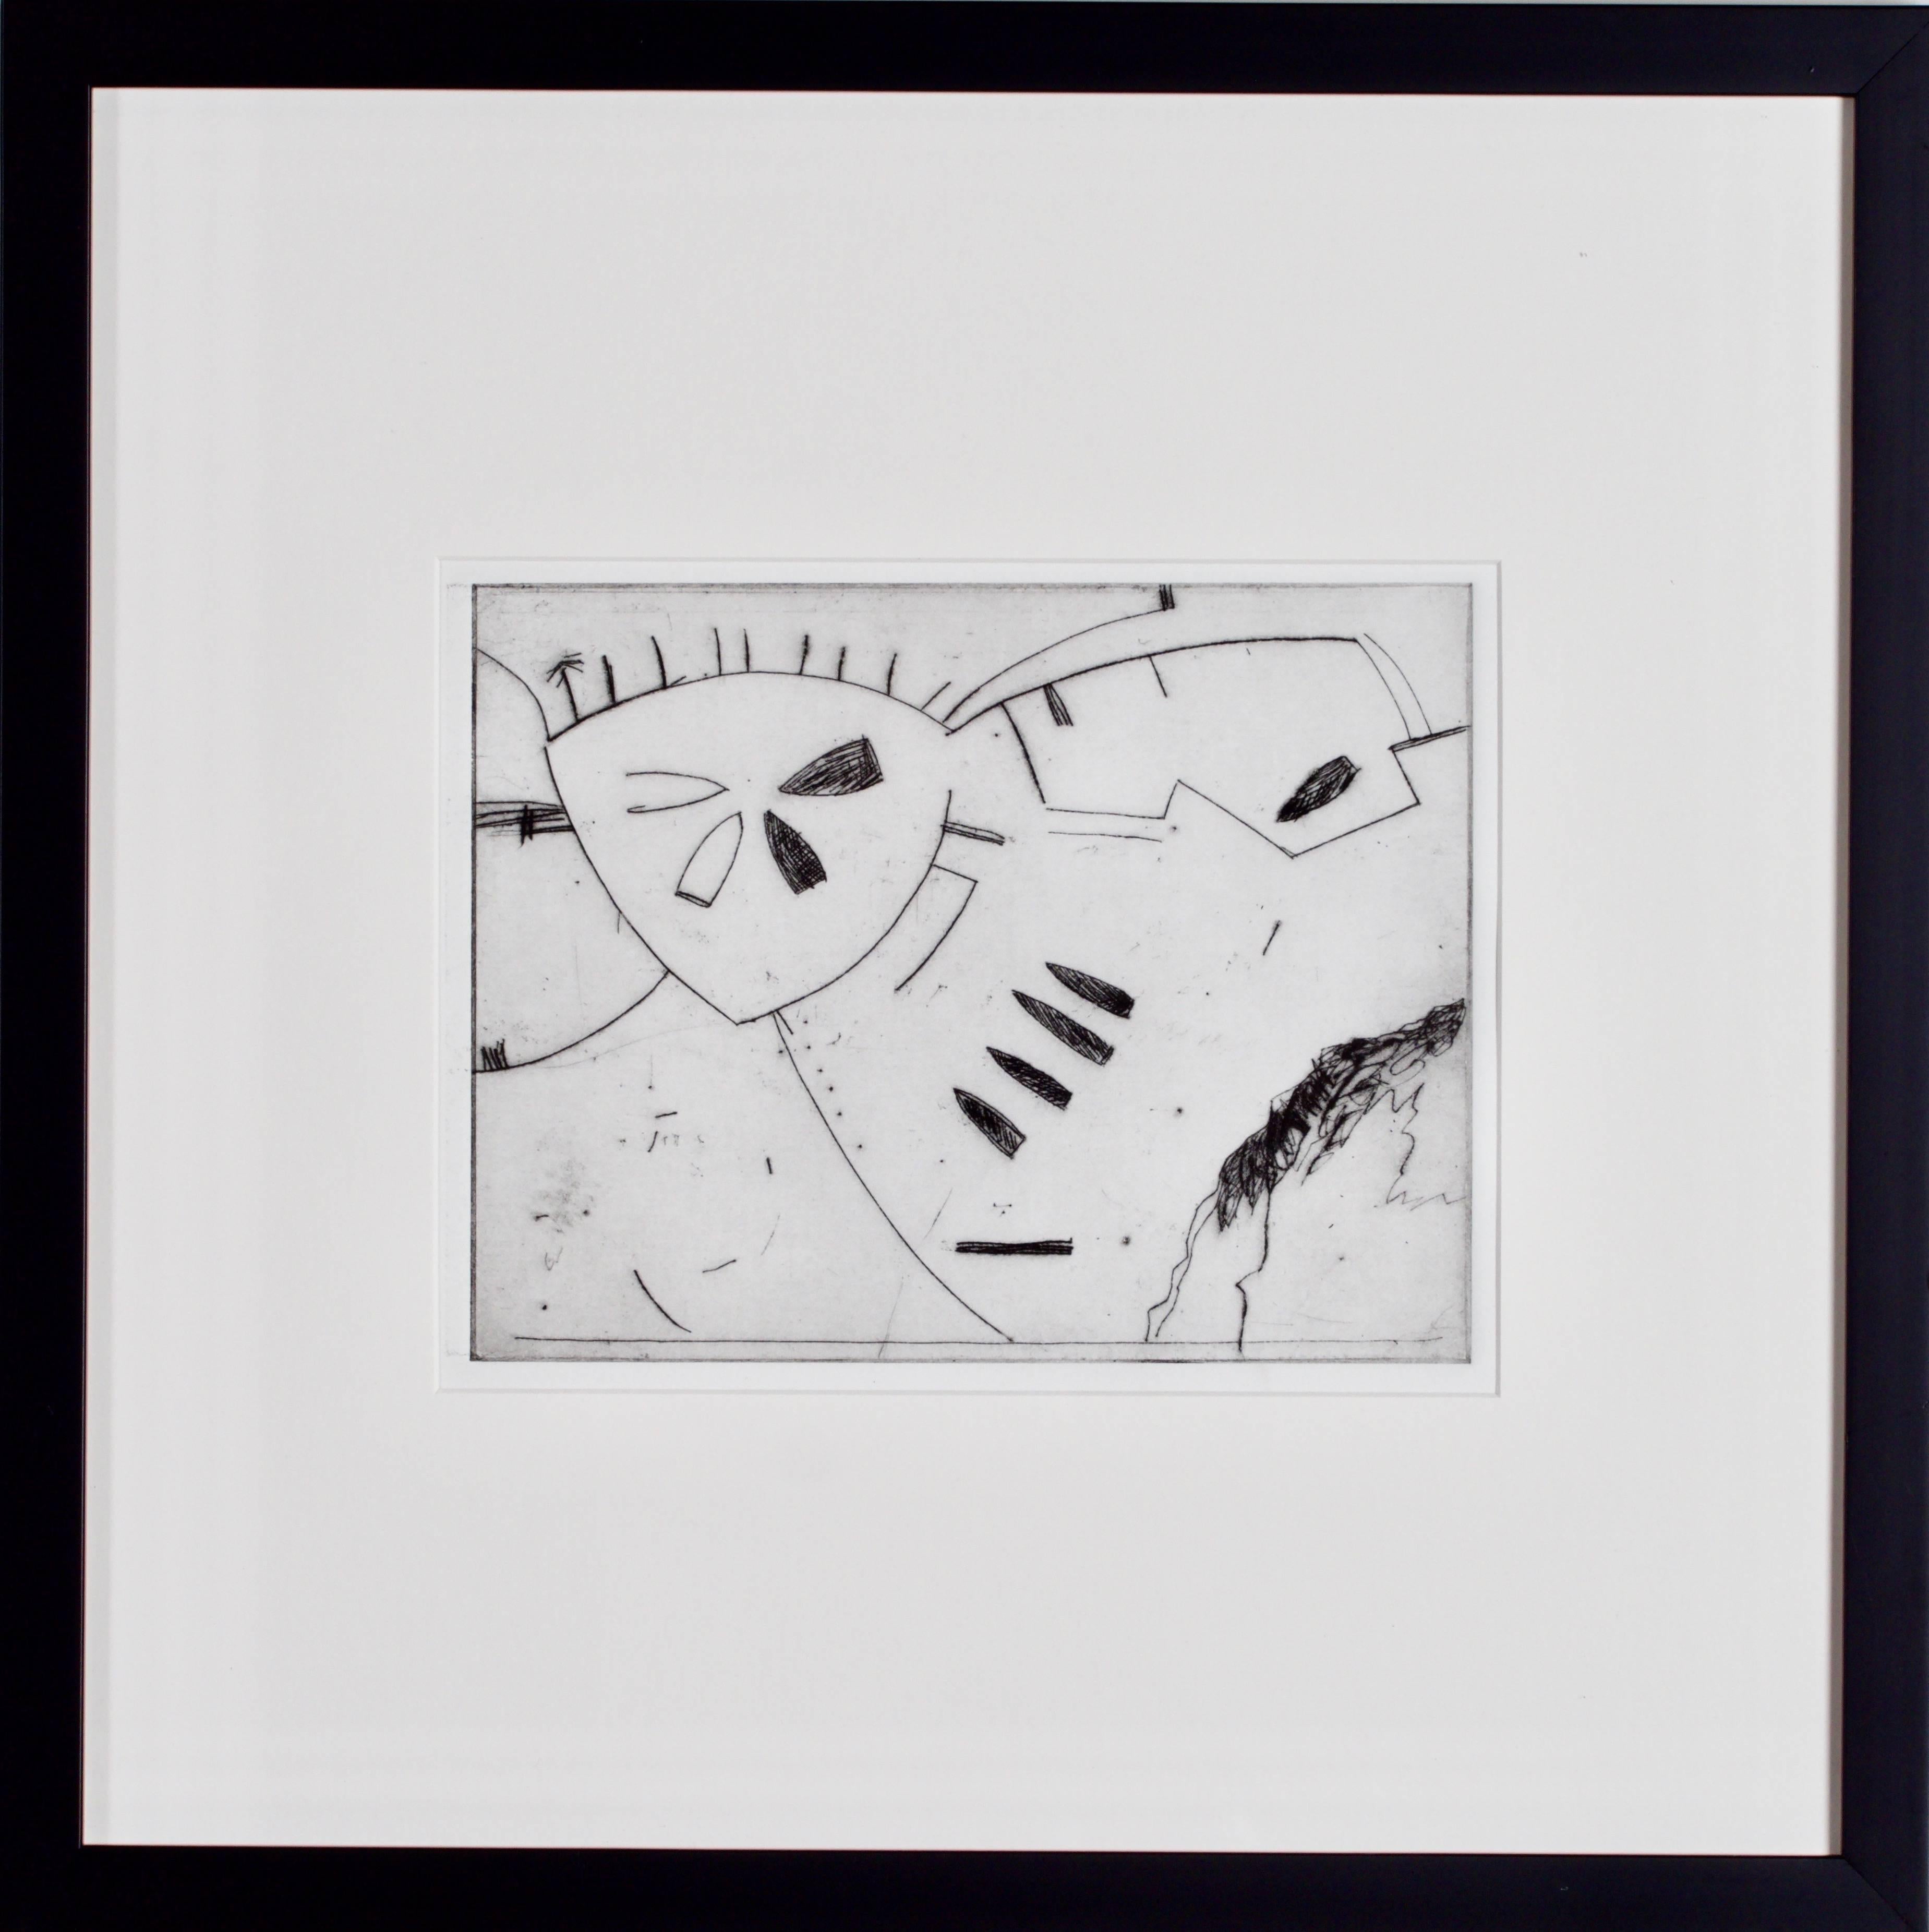 Robert Reynolds Abstract Print - "Landing Area Sectors" - Abstract Drypoint Etching 